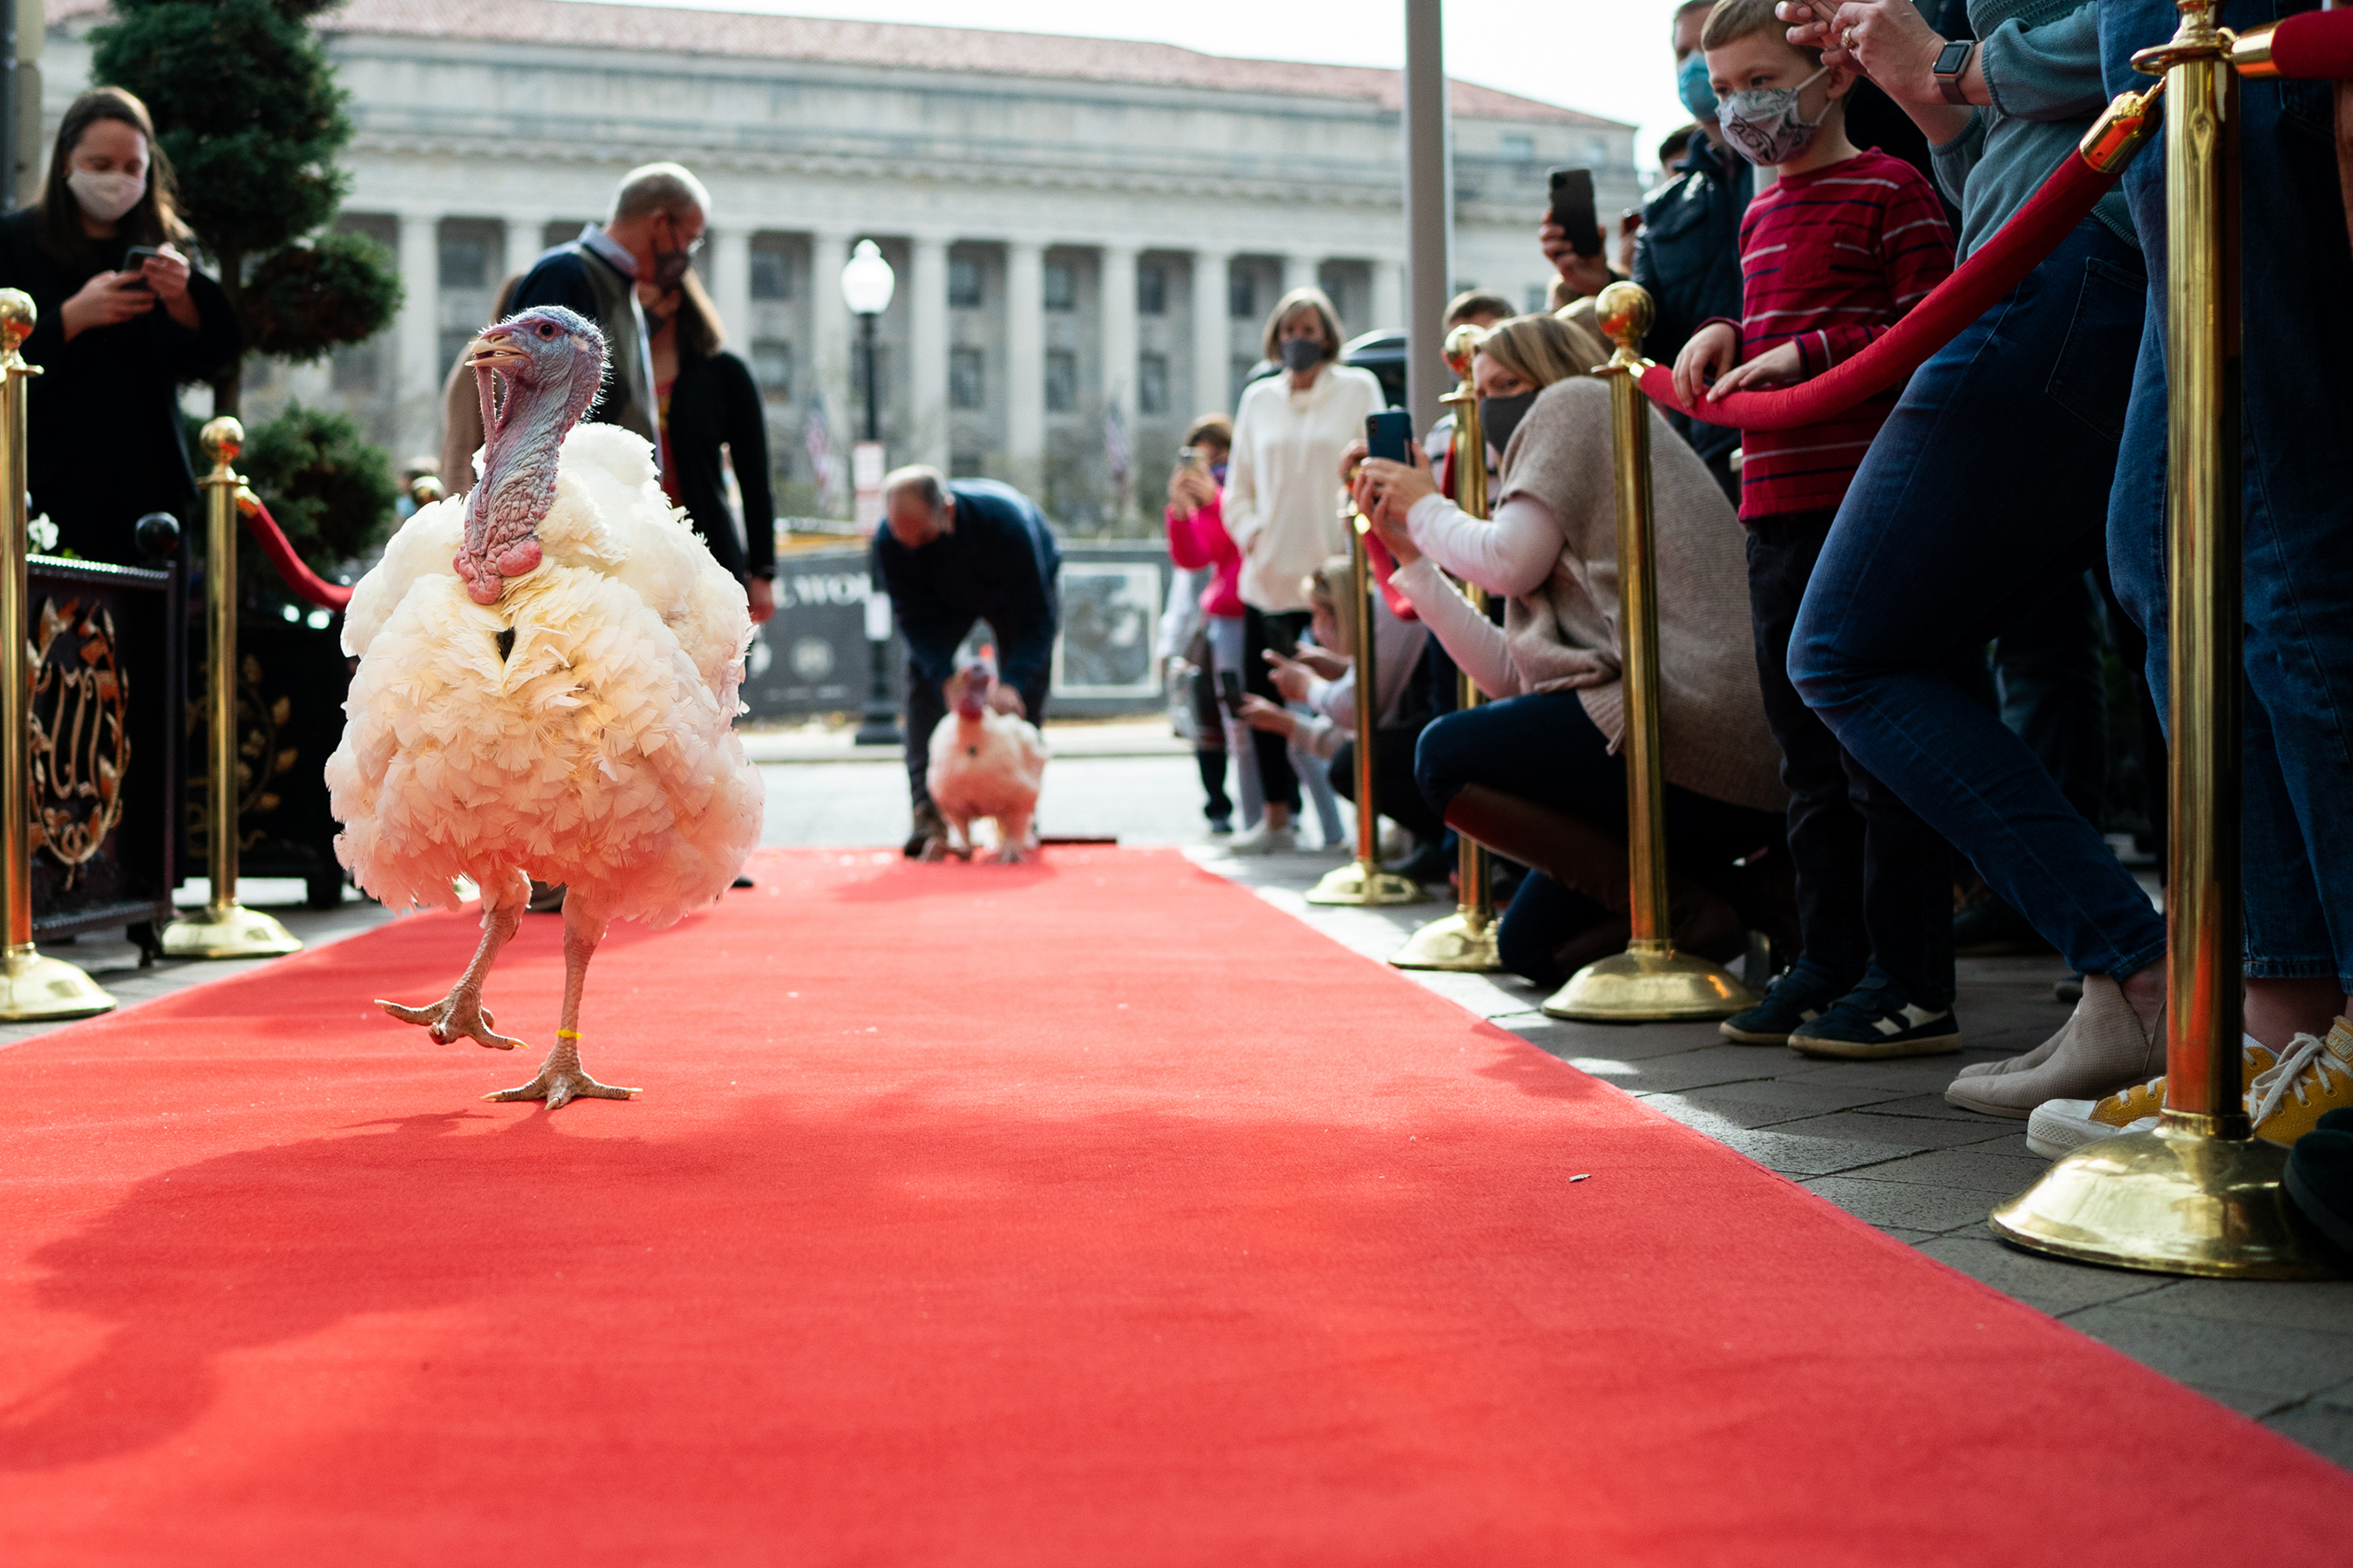 The National Thanksgiving Turkeys walk the red carpet at the Willard Intercontinental Hotel. Photo credit: Andrea Hanks/The White House